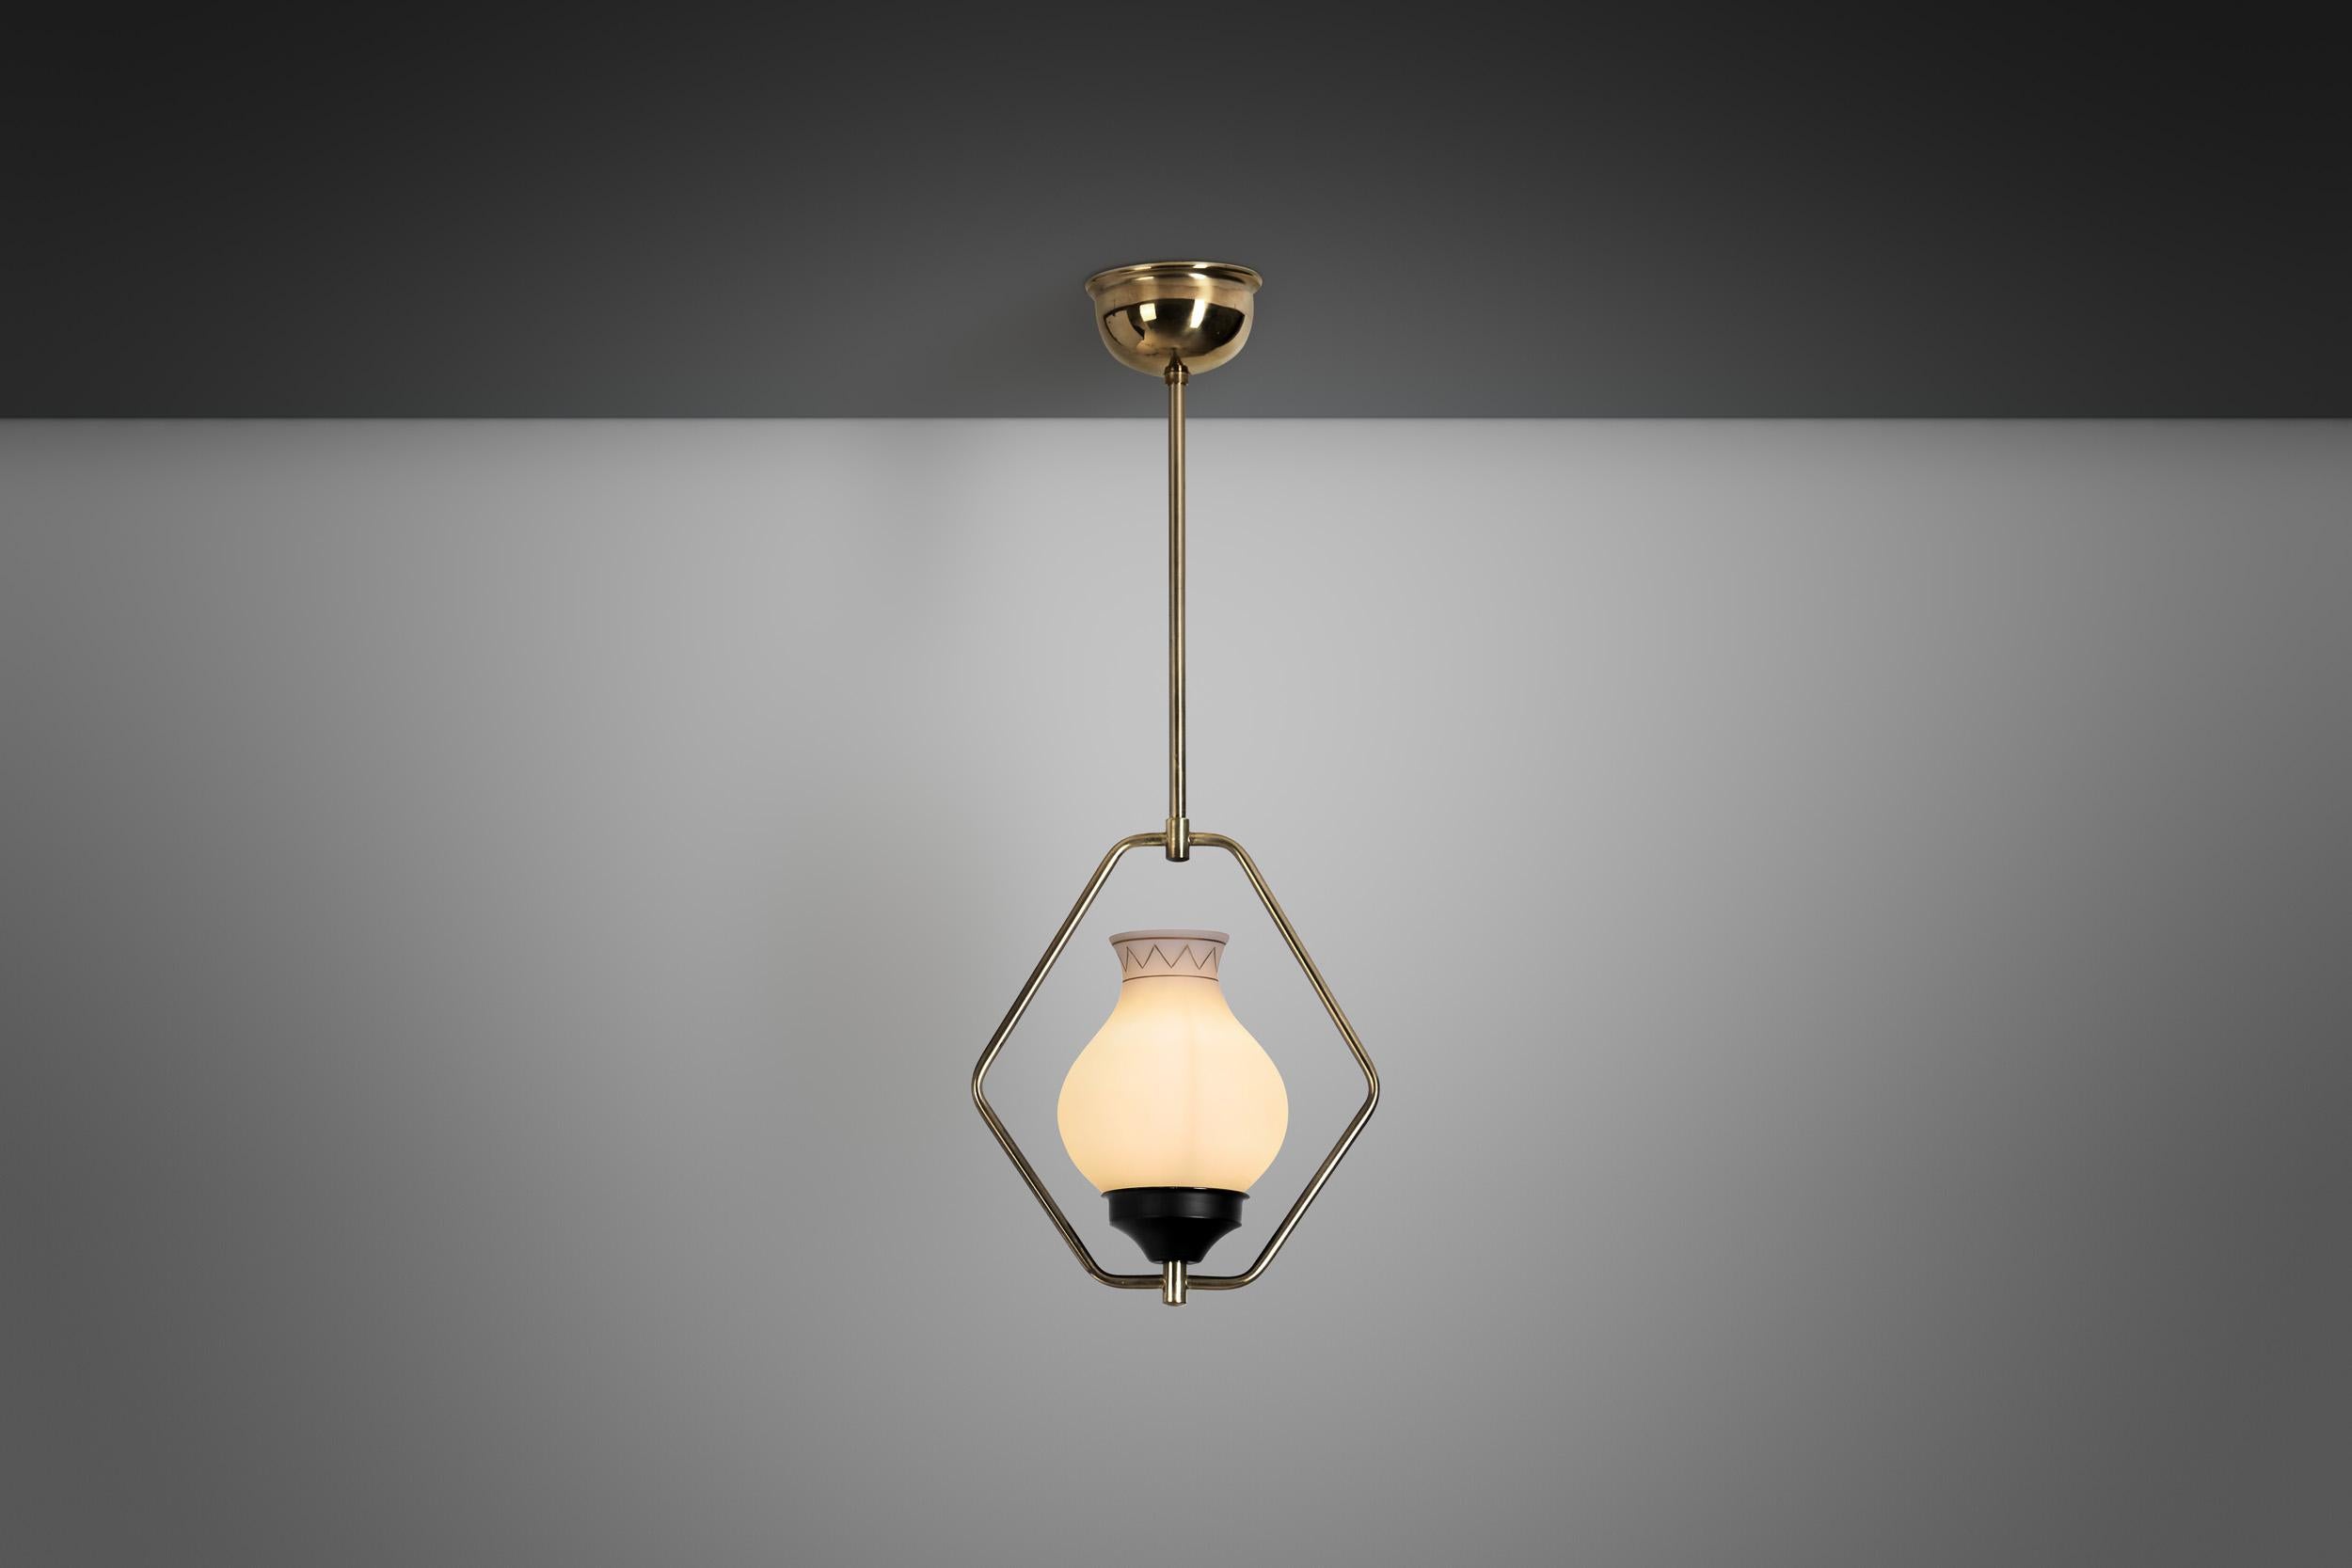 The best thing about hanging ceiling lights - besides their stylish look - is that they are a great option to make interiors appear more spacious. They can be used to concentrate light, or to just add an accent to the room. 

This lamp’s design